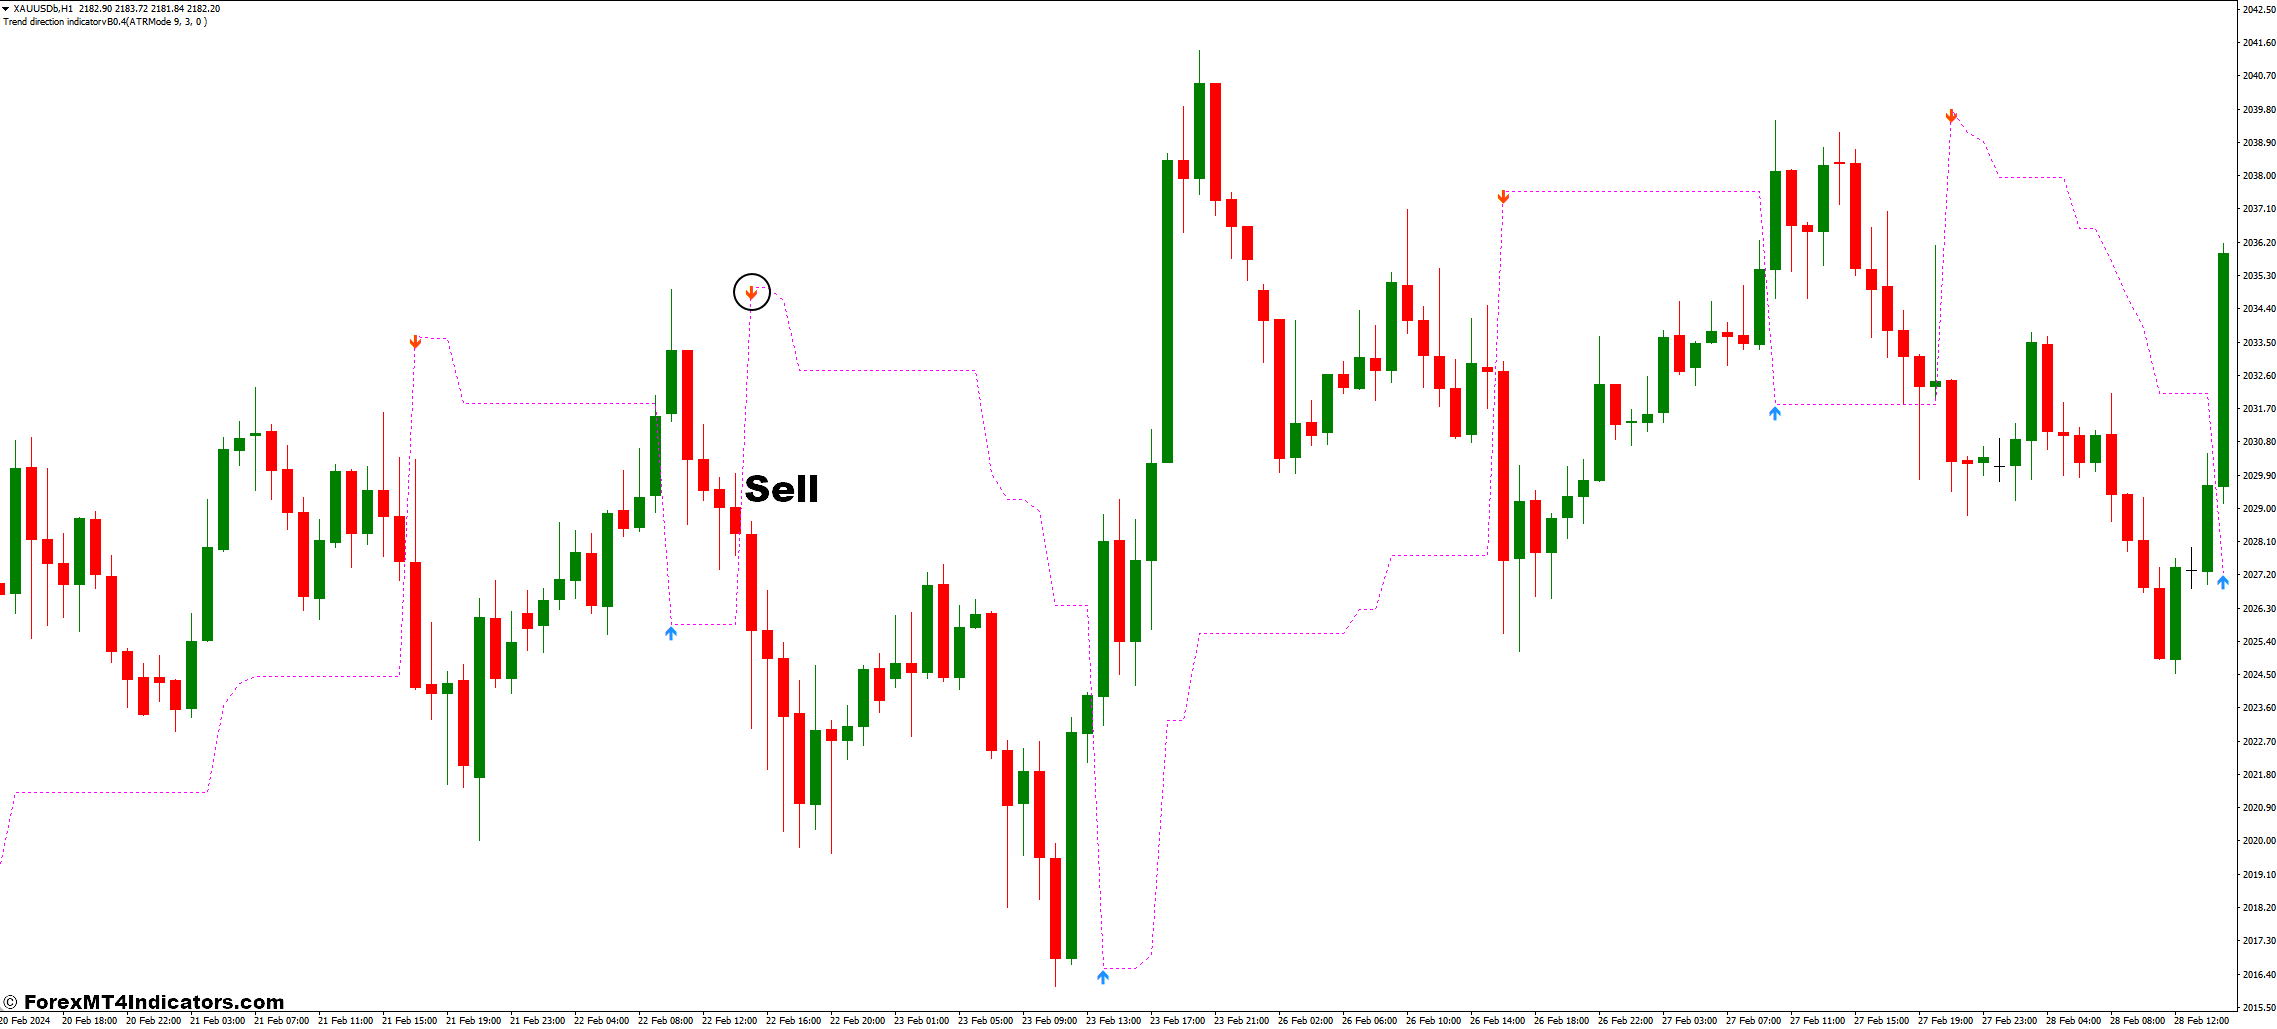 How to Trade With the Trend Direction MT4 Indicator - Sell Entry